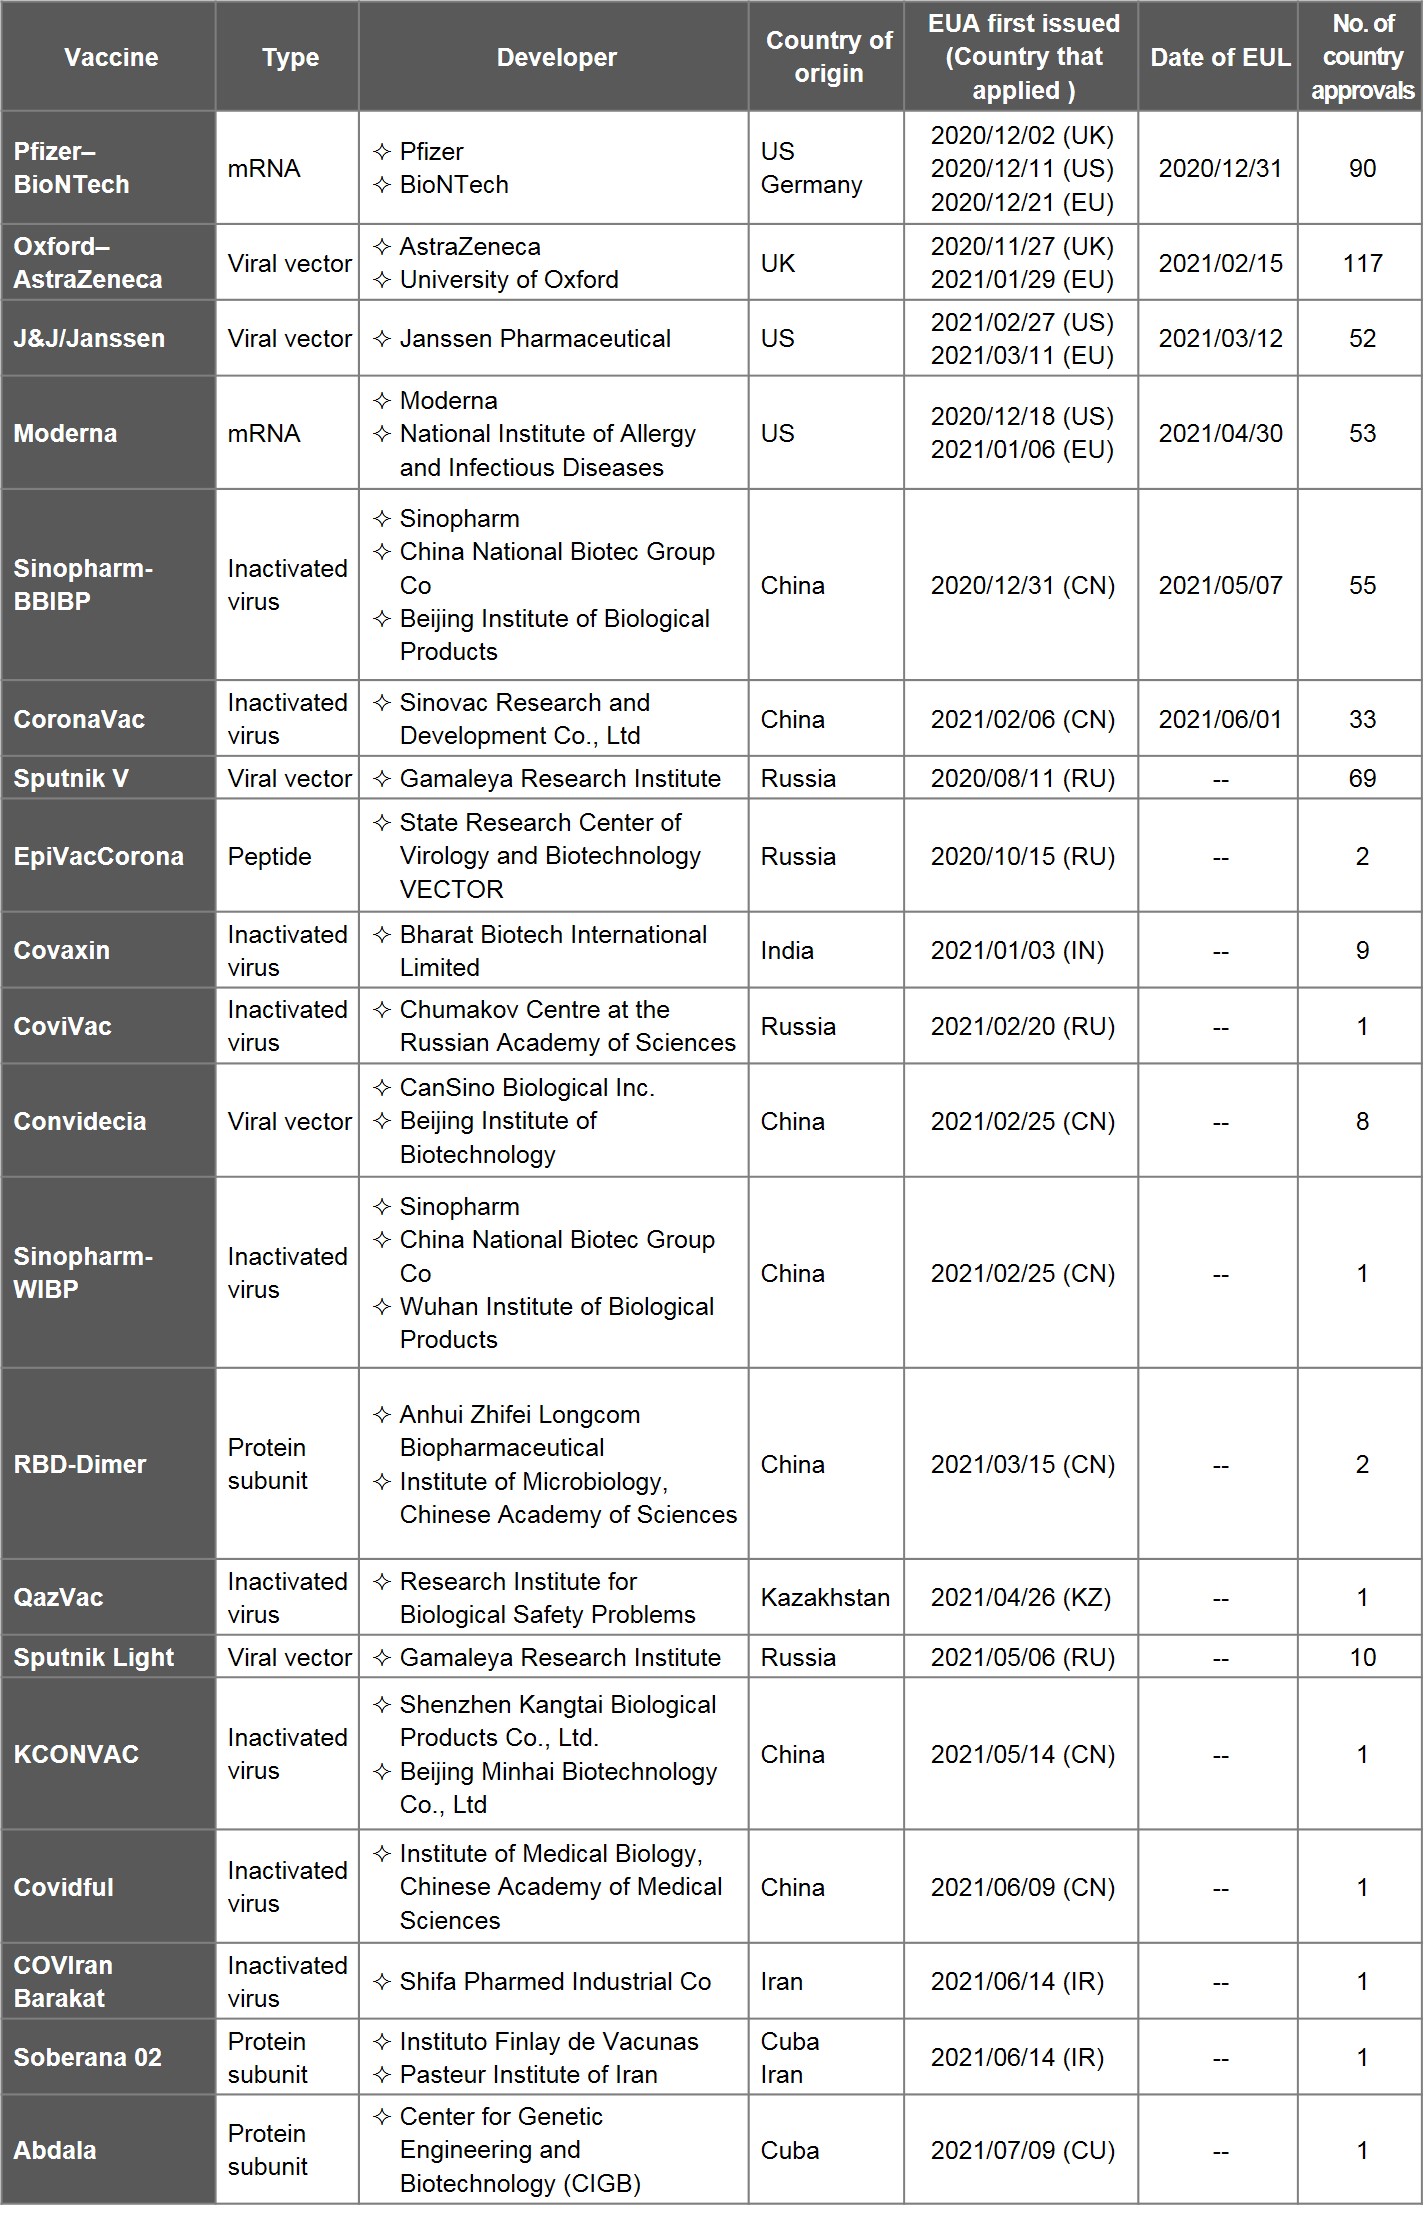 List of COVID-19 Vaccines with EUA